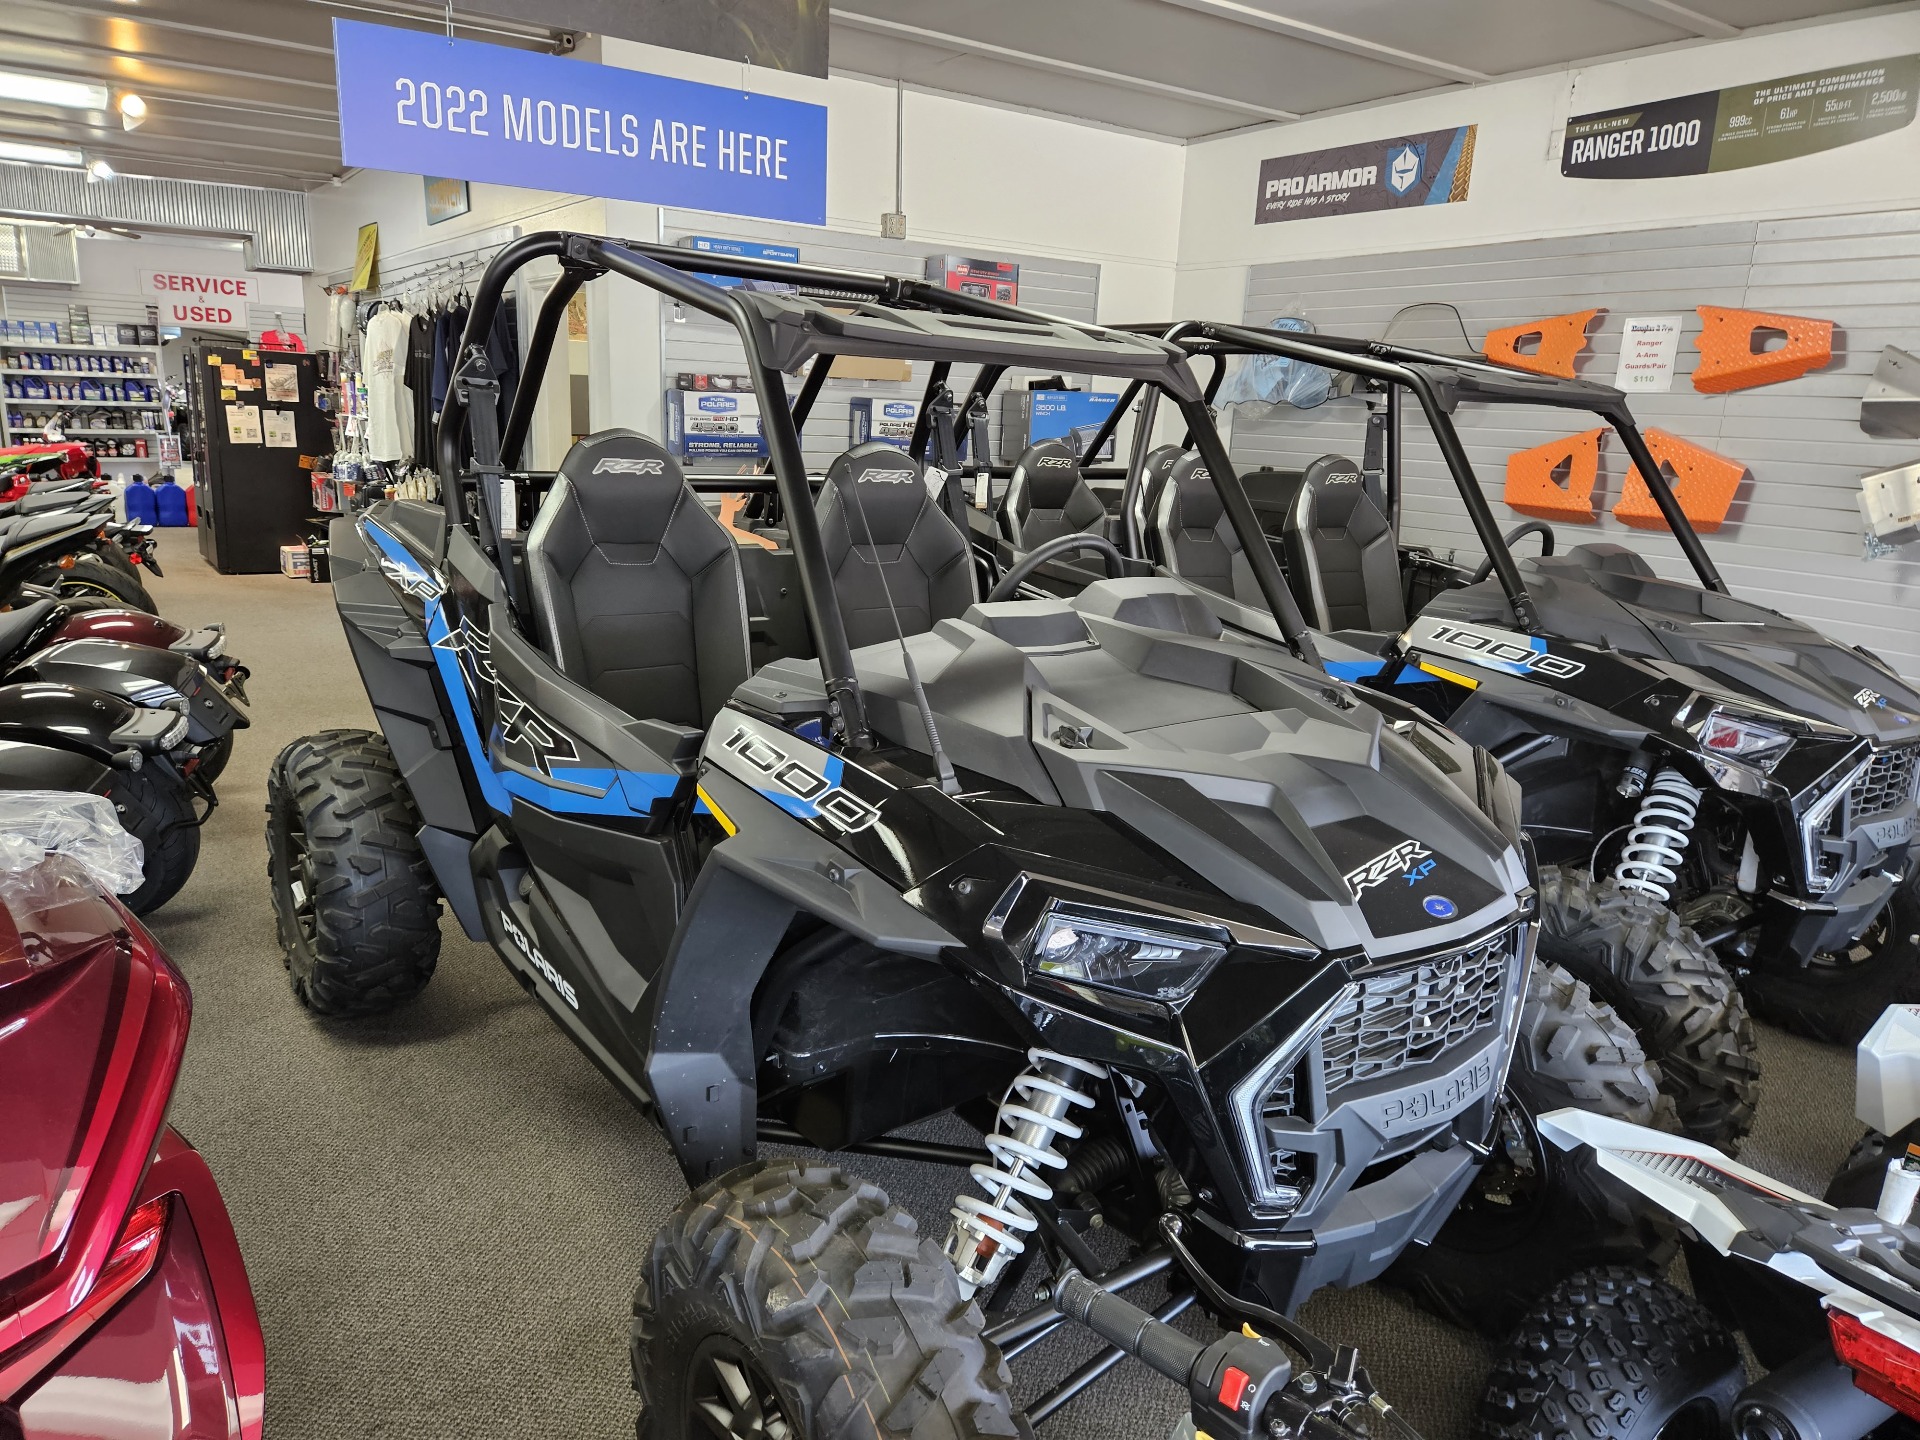 2023 Polaris RZR XP 1000 Ultimate in Sterling, Illinois - Photo 2